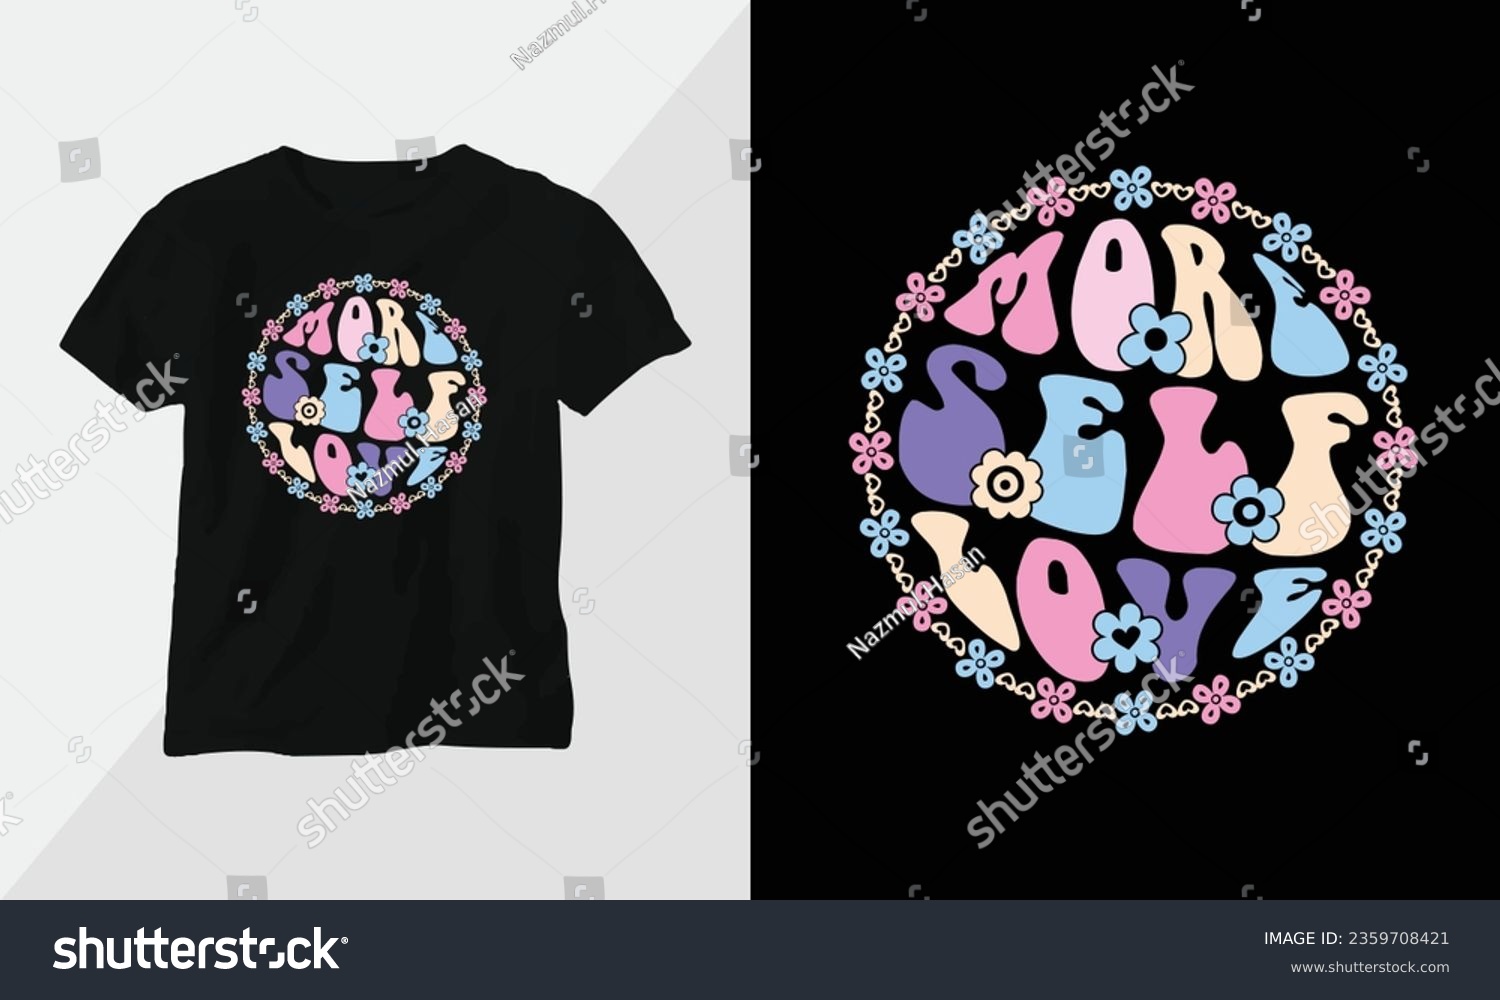 SVG of more self-love - Retro Groovy Inspirational T-shirt Design with retro style svg